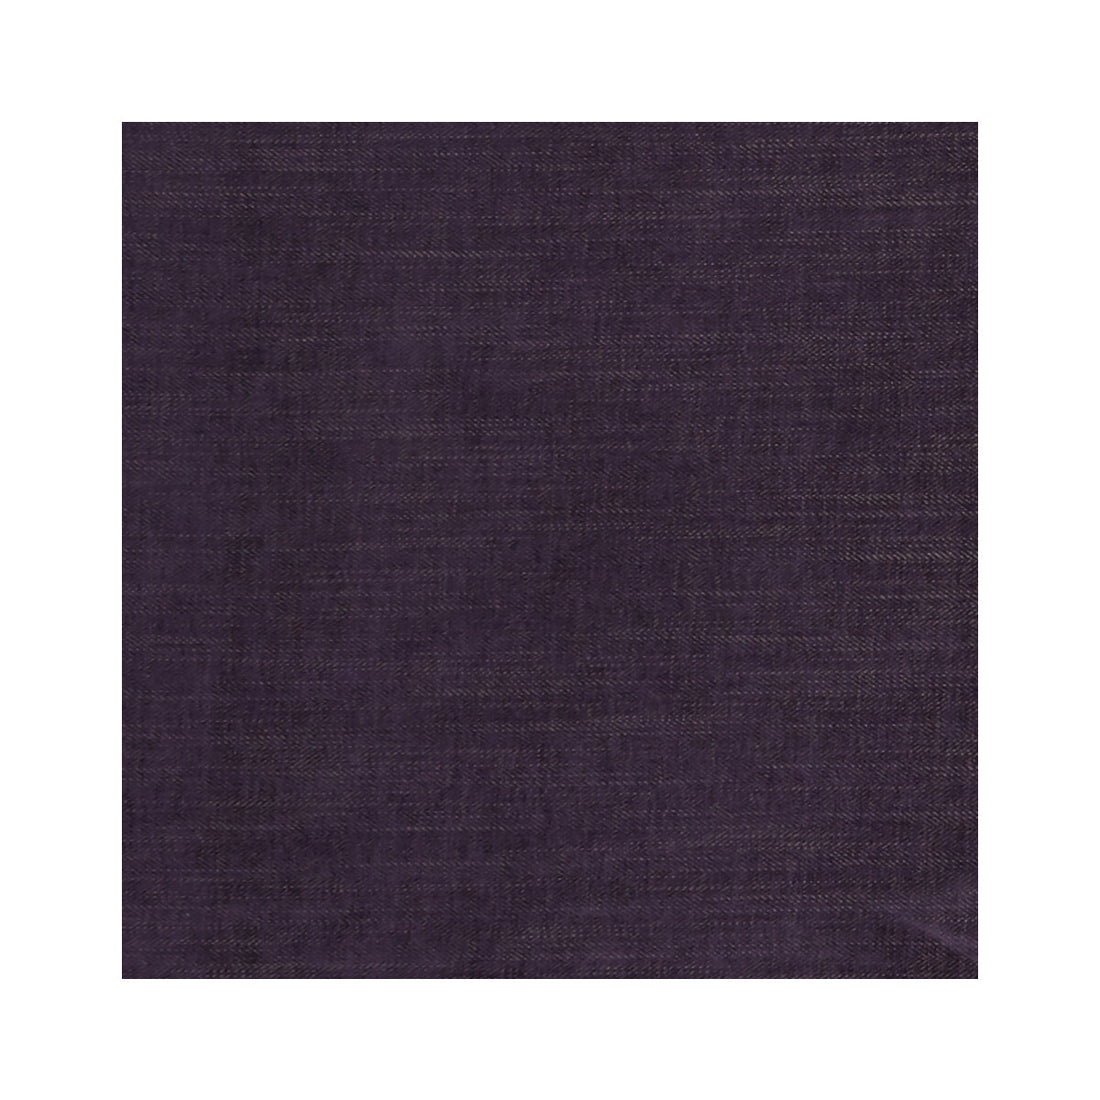 Moray fabric in grape color - pattern F1099/13.CAC.0 - by Clarke And Clarke in the Clarke &amp; Clarke Albany &amp; Moray collection